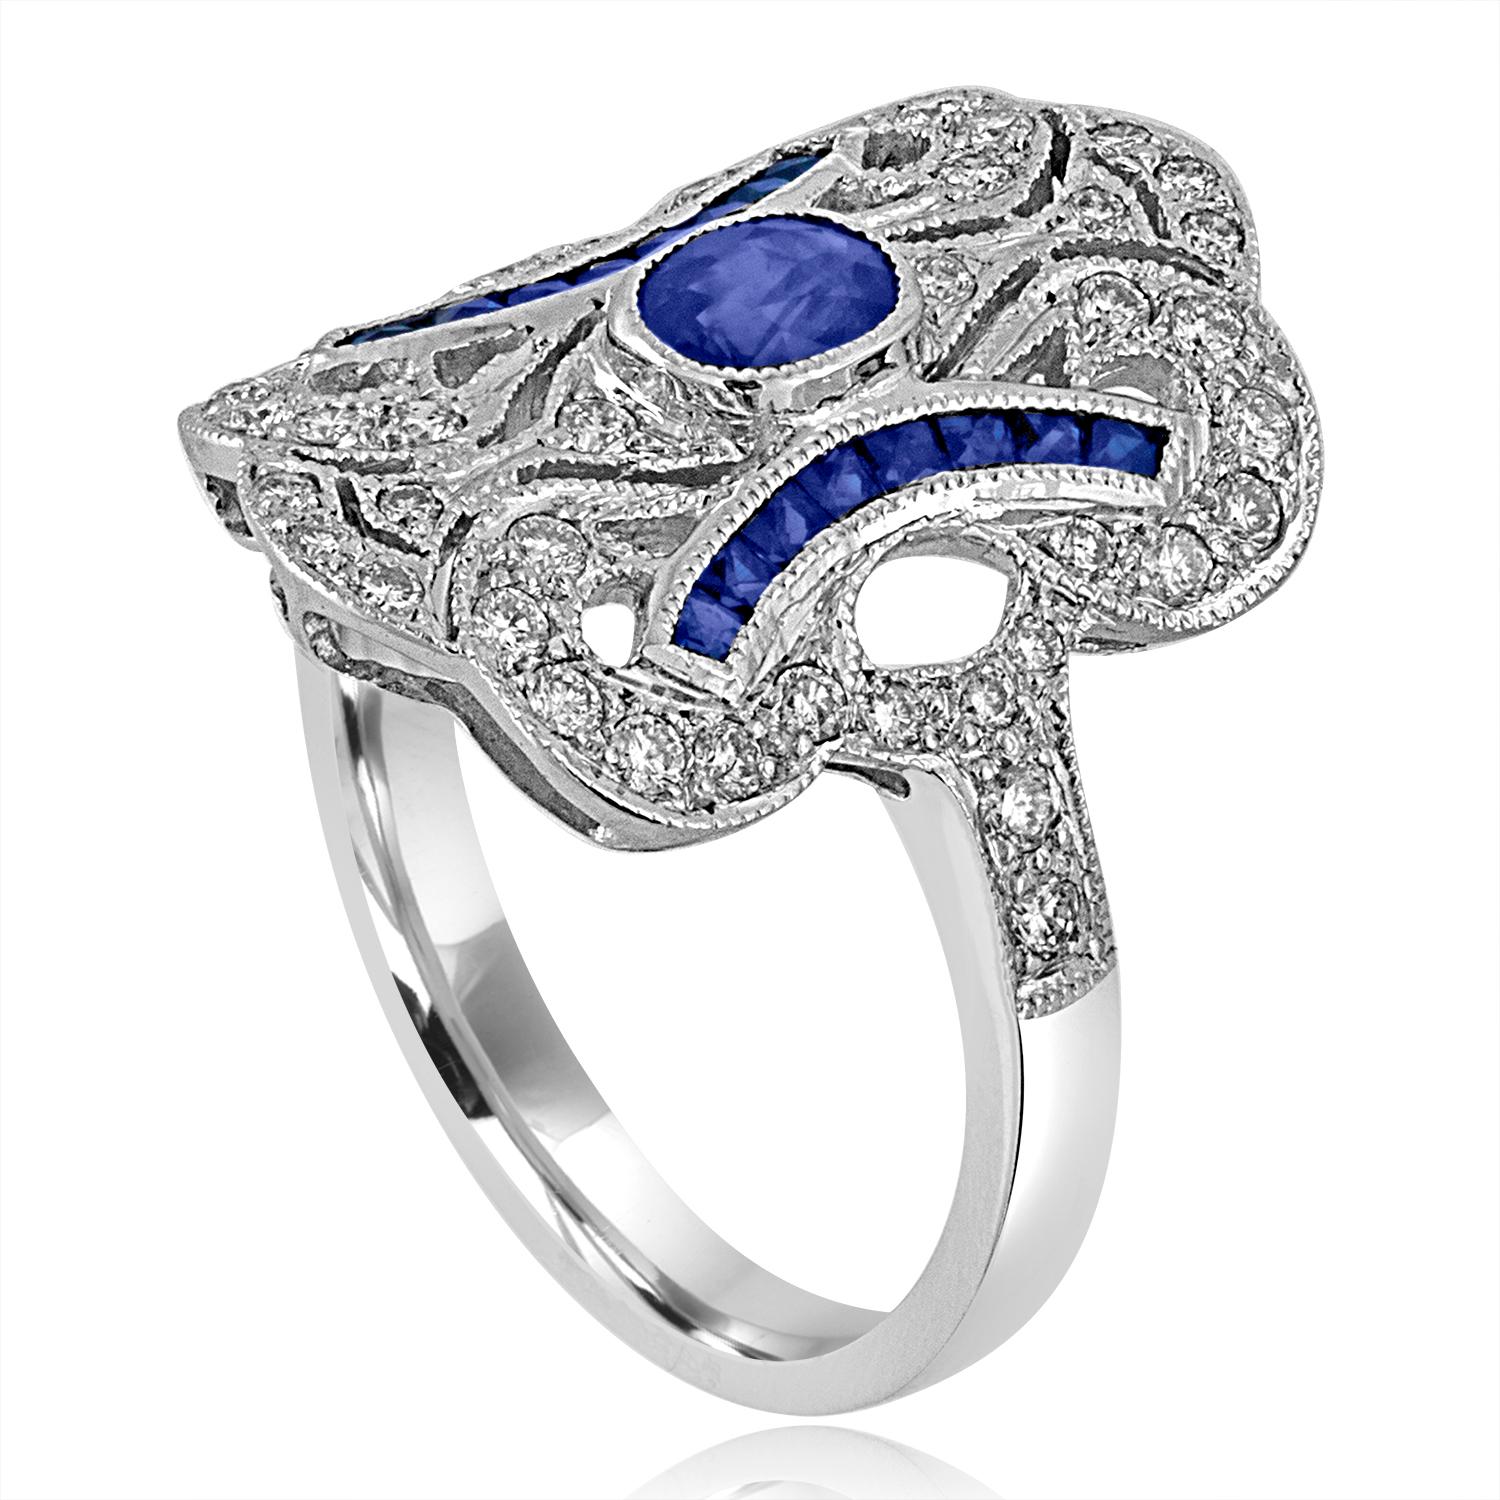 Art Deco Revival Style Ring
The ring is 18K White Gold
There are 0.55 Carats in Diamonds G SI
There are 0.60 Carats in Blue Sapphires
The ring is a size 6.75, sizable
The ring weighs 5.3 grams